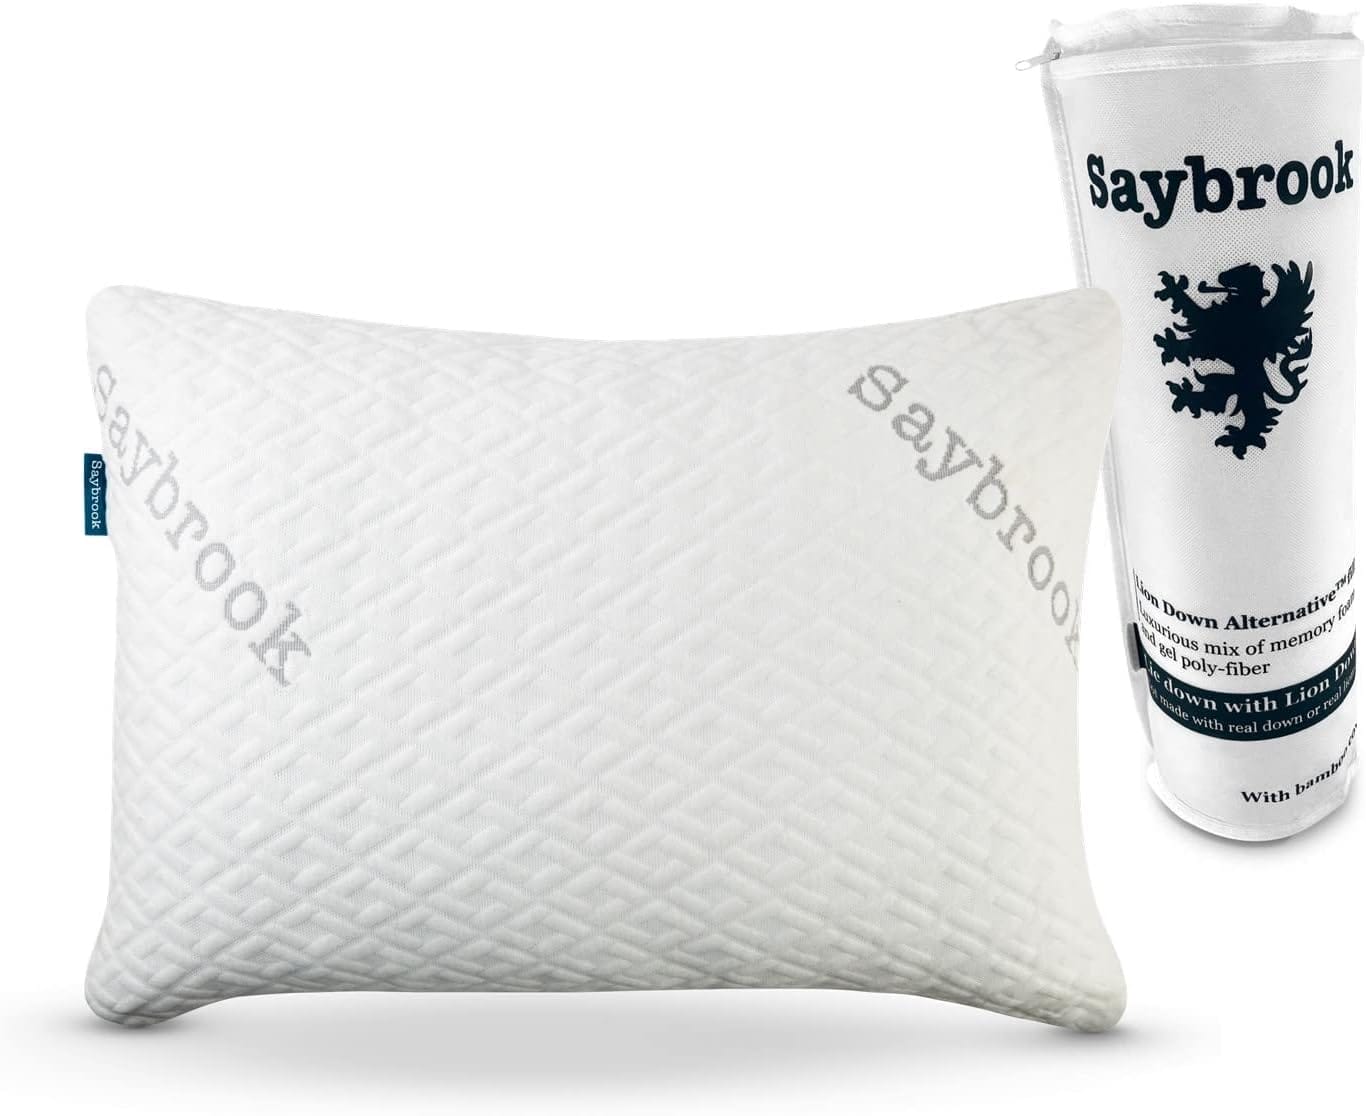 Saybrook Pillow Review: Serenity or Sleepless Nights?